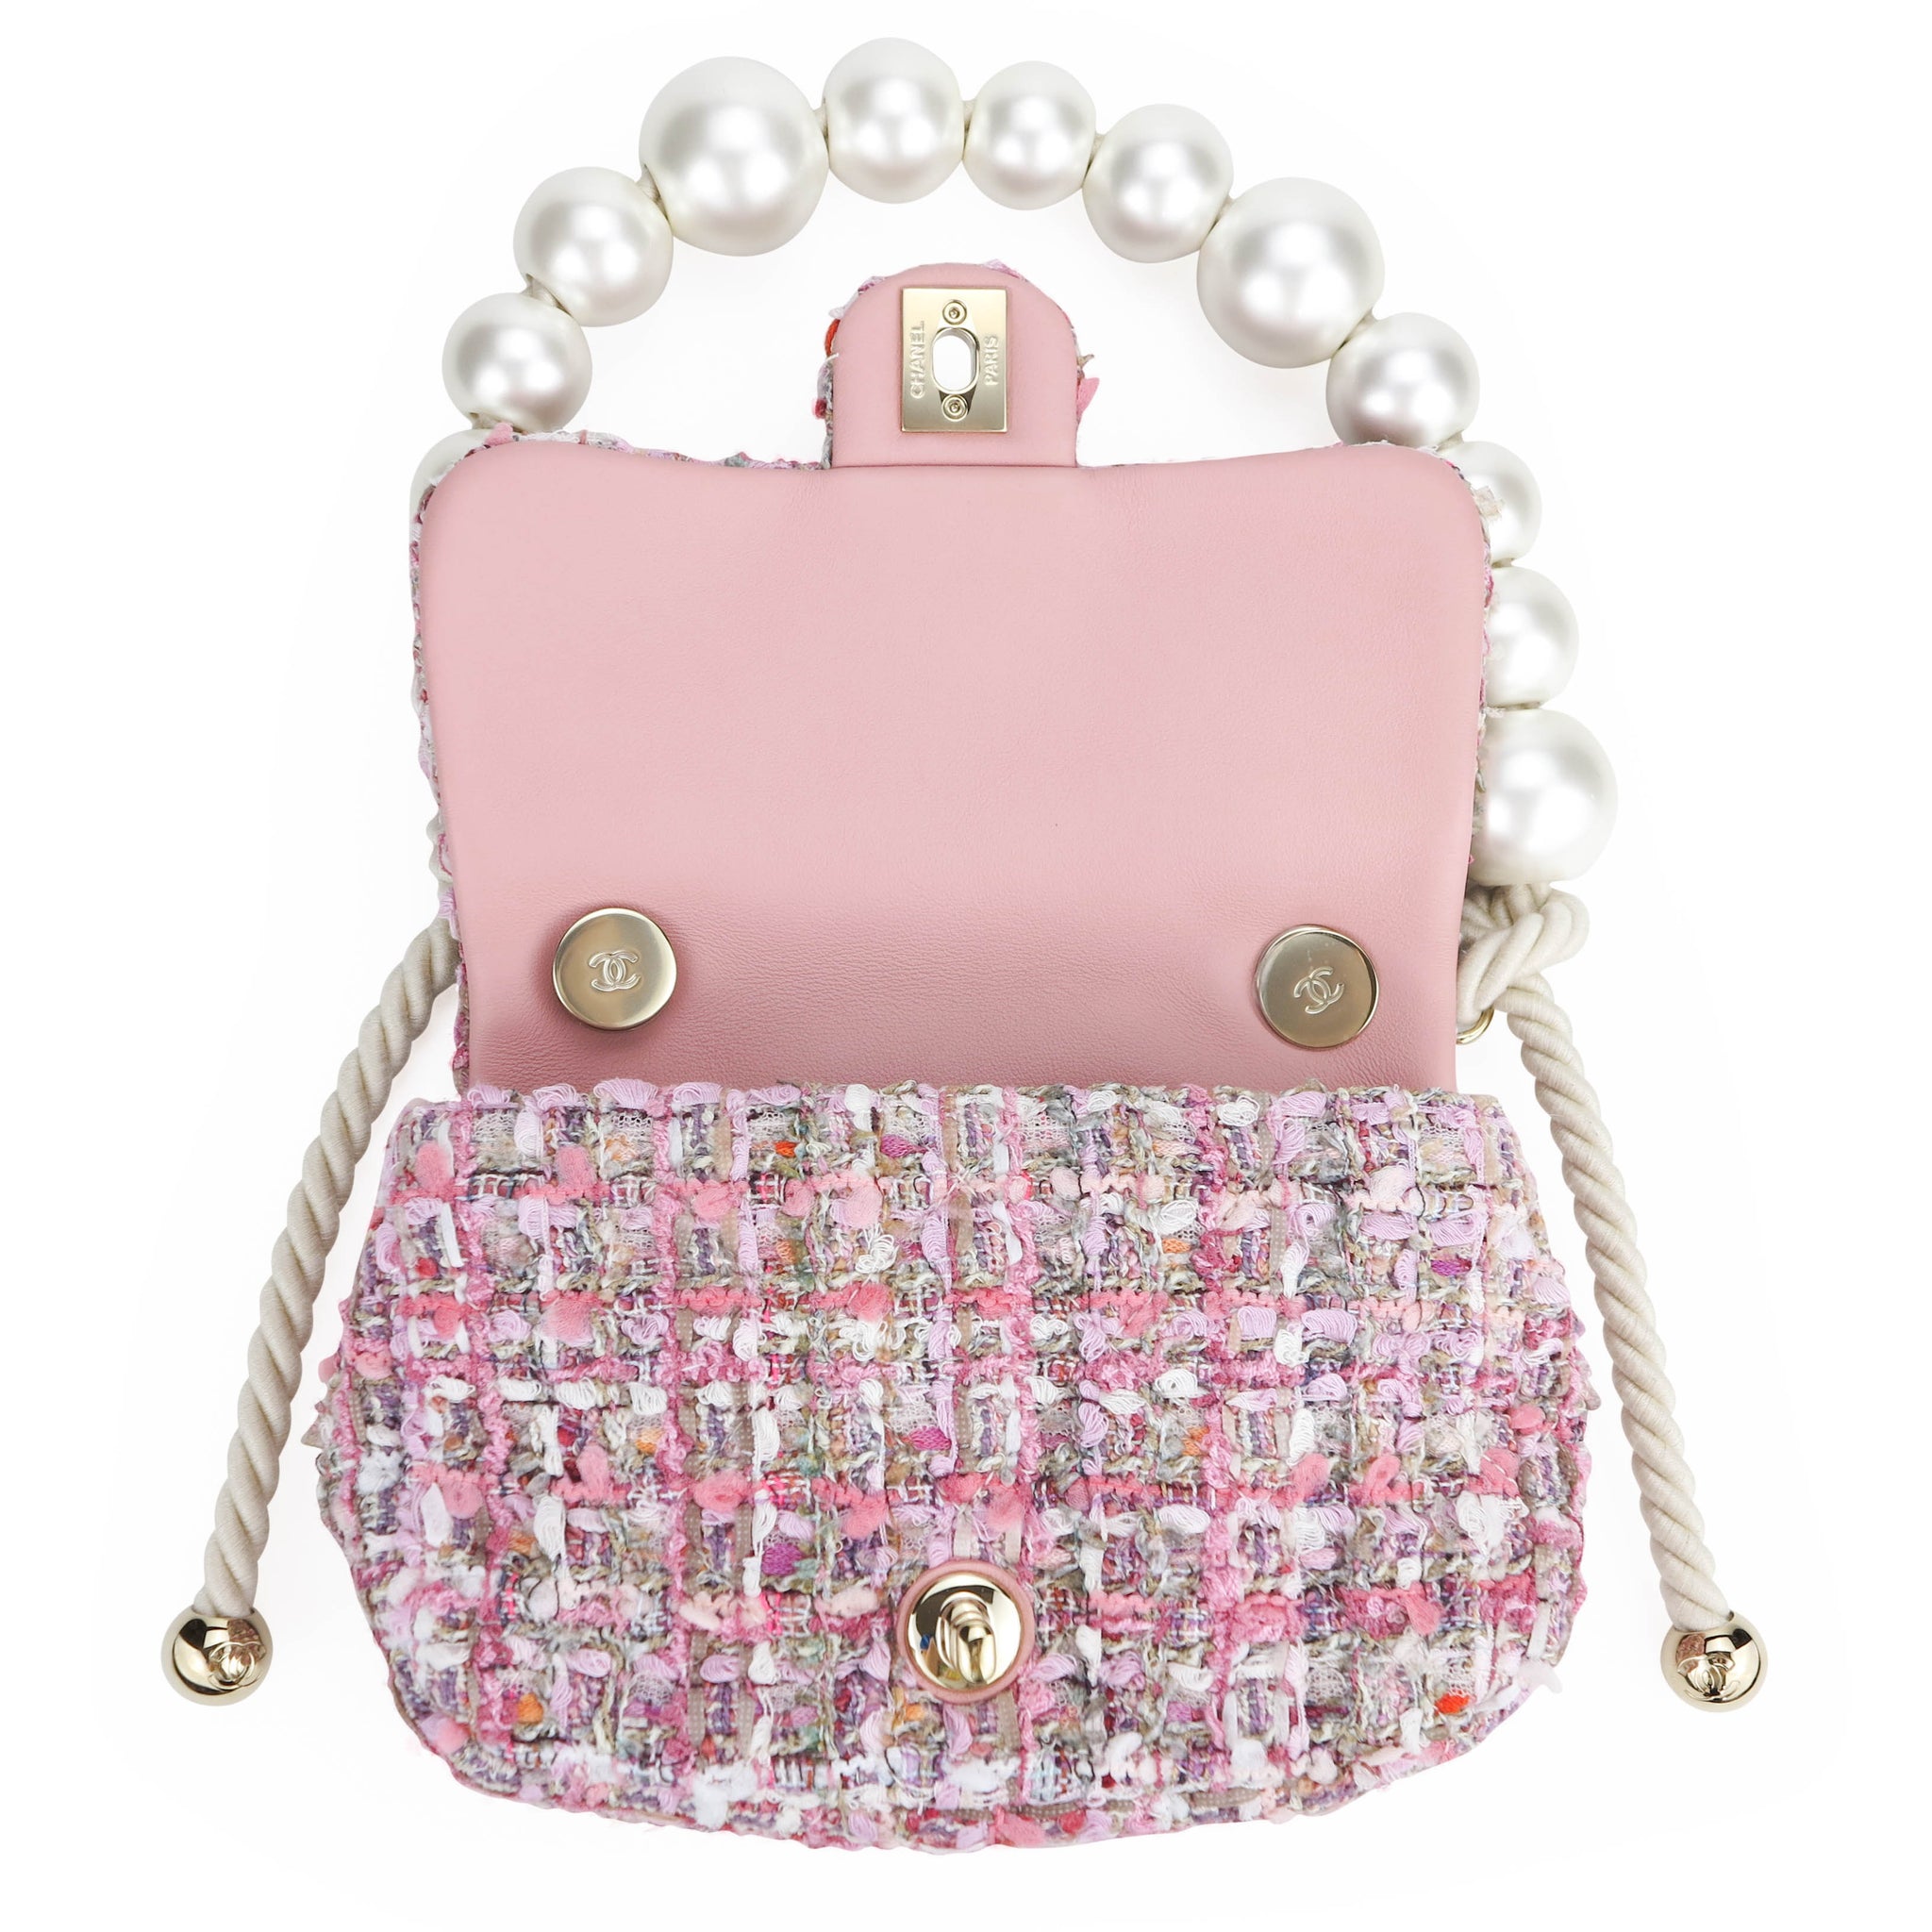 Pink Tweed Mini Pearl Handle Flap Silver Hardware 2019  Handbags   Accessories  The New York Collection  2021  Sothebys